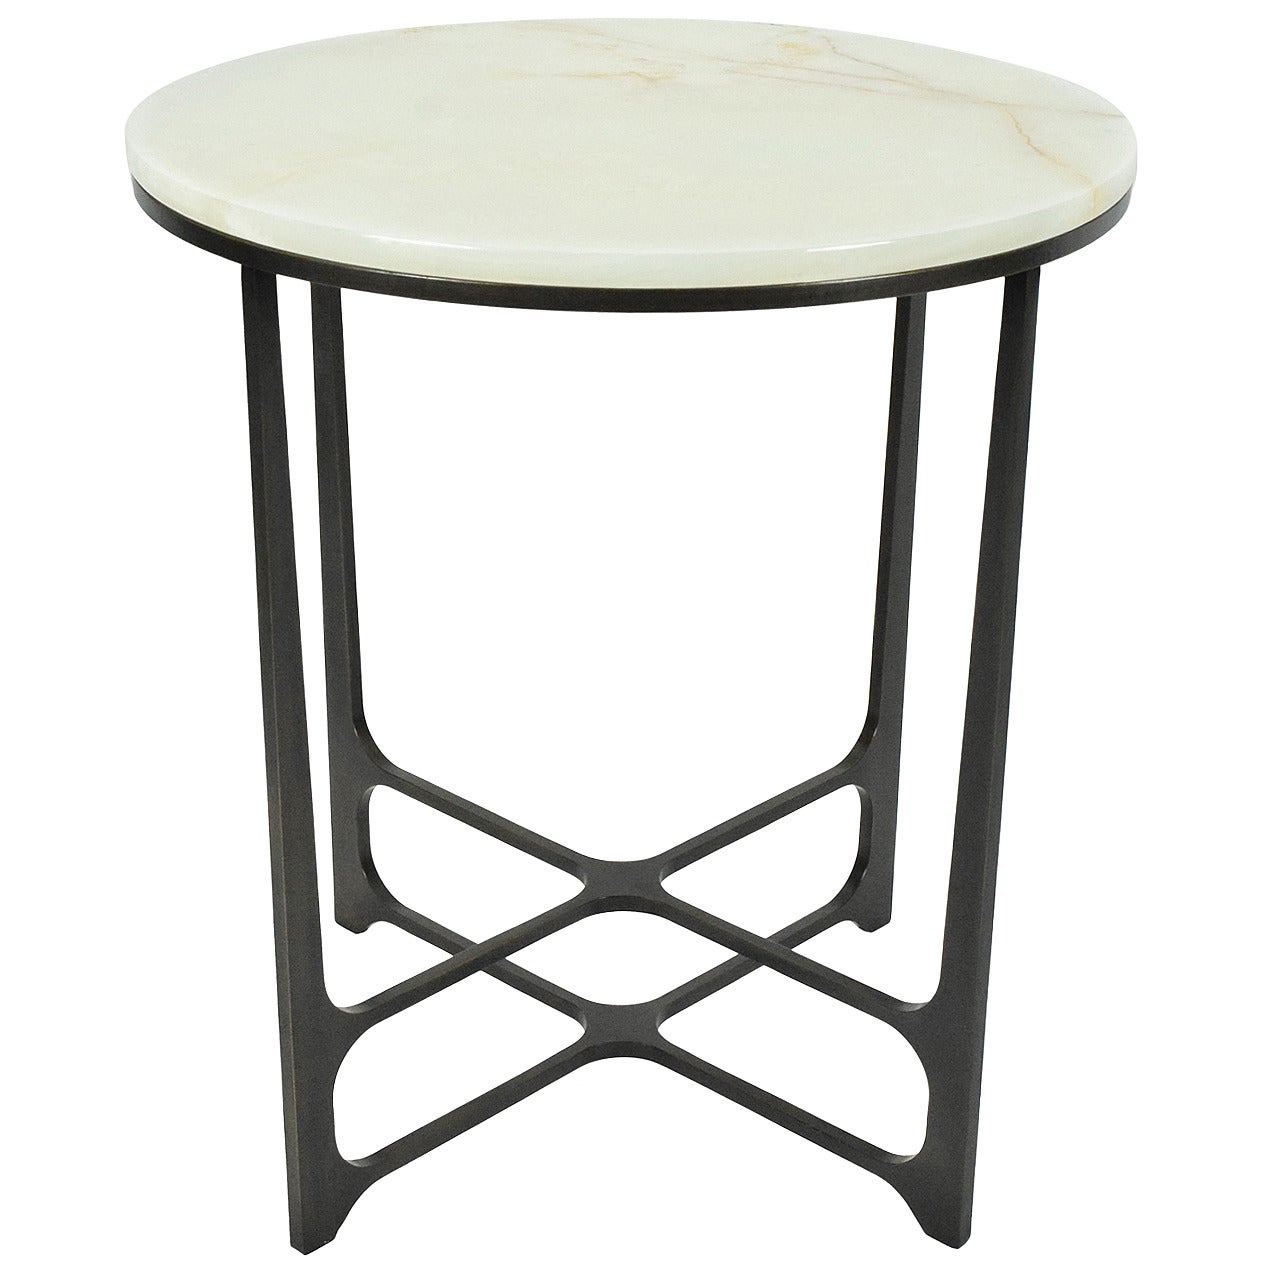 William Yeoward Malvina Side Table with Onyx Top and Bronze Base